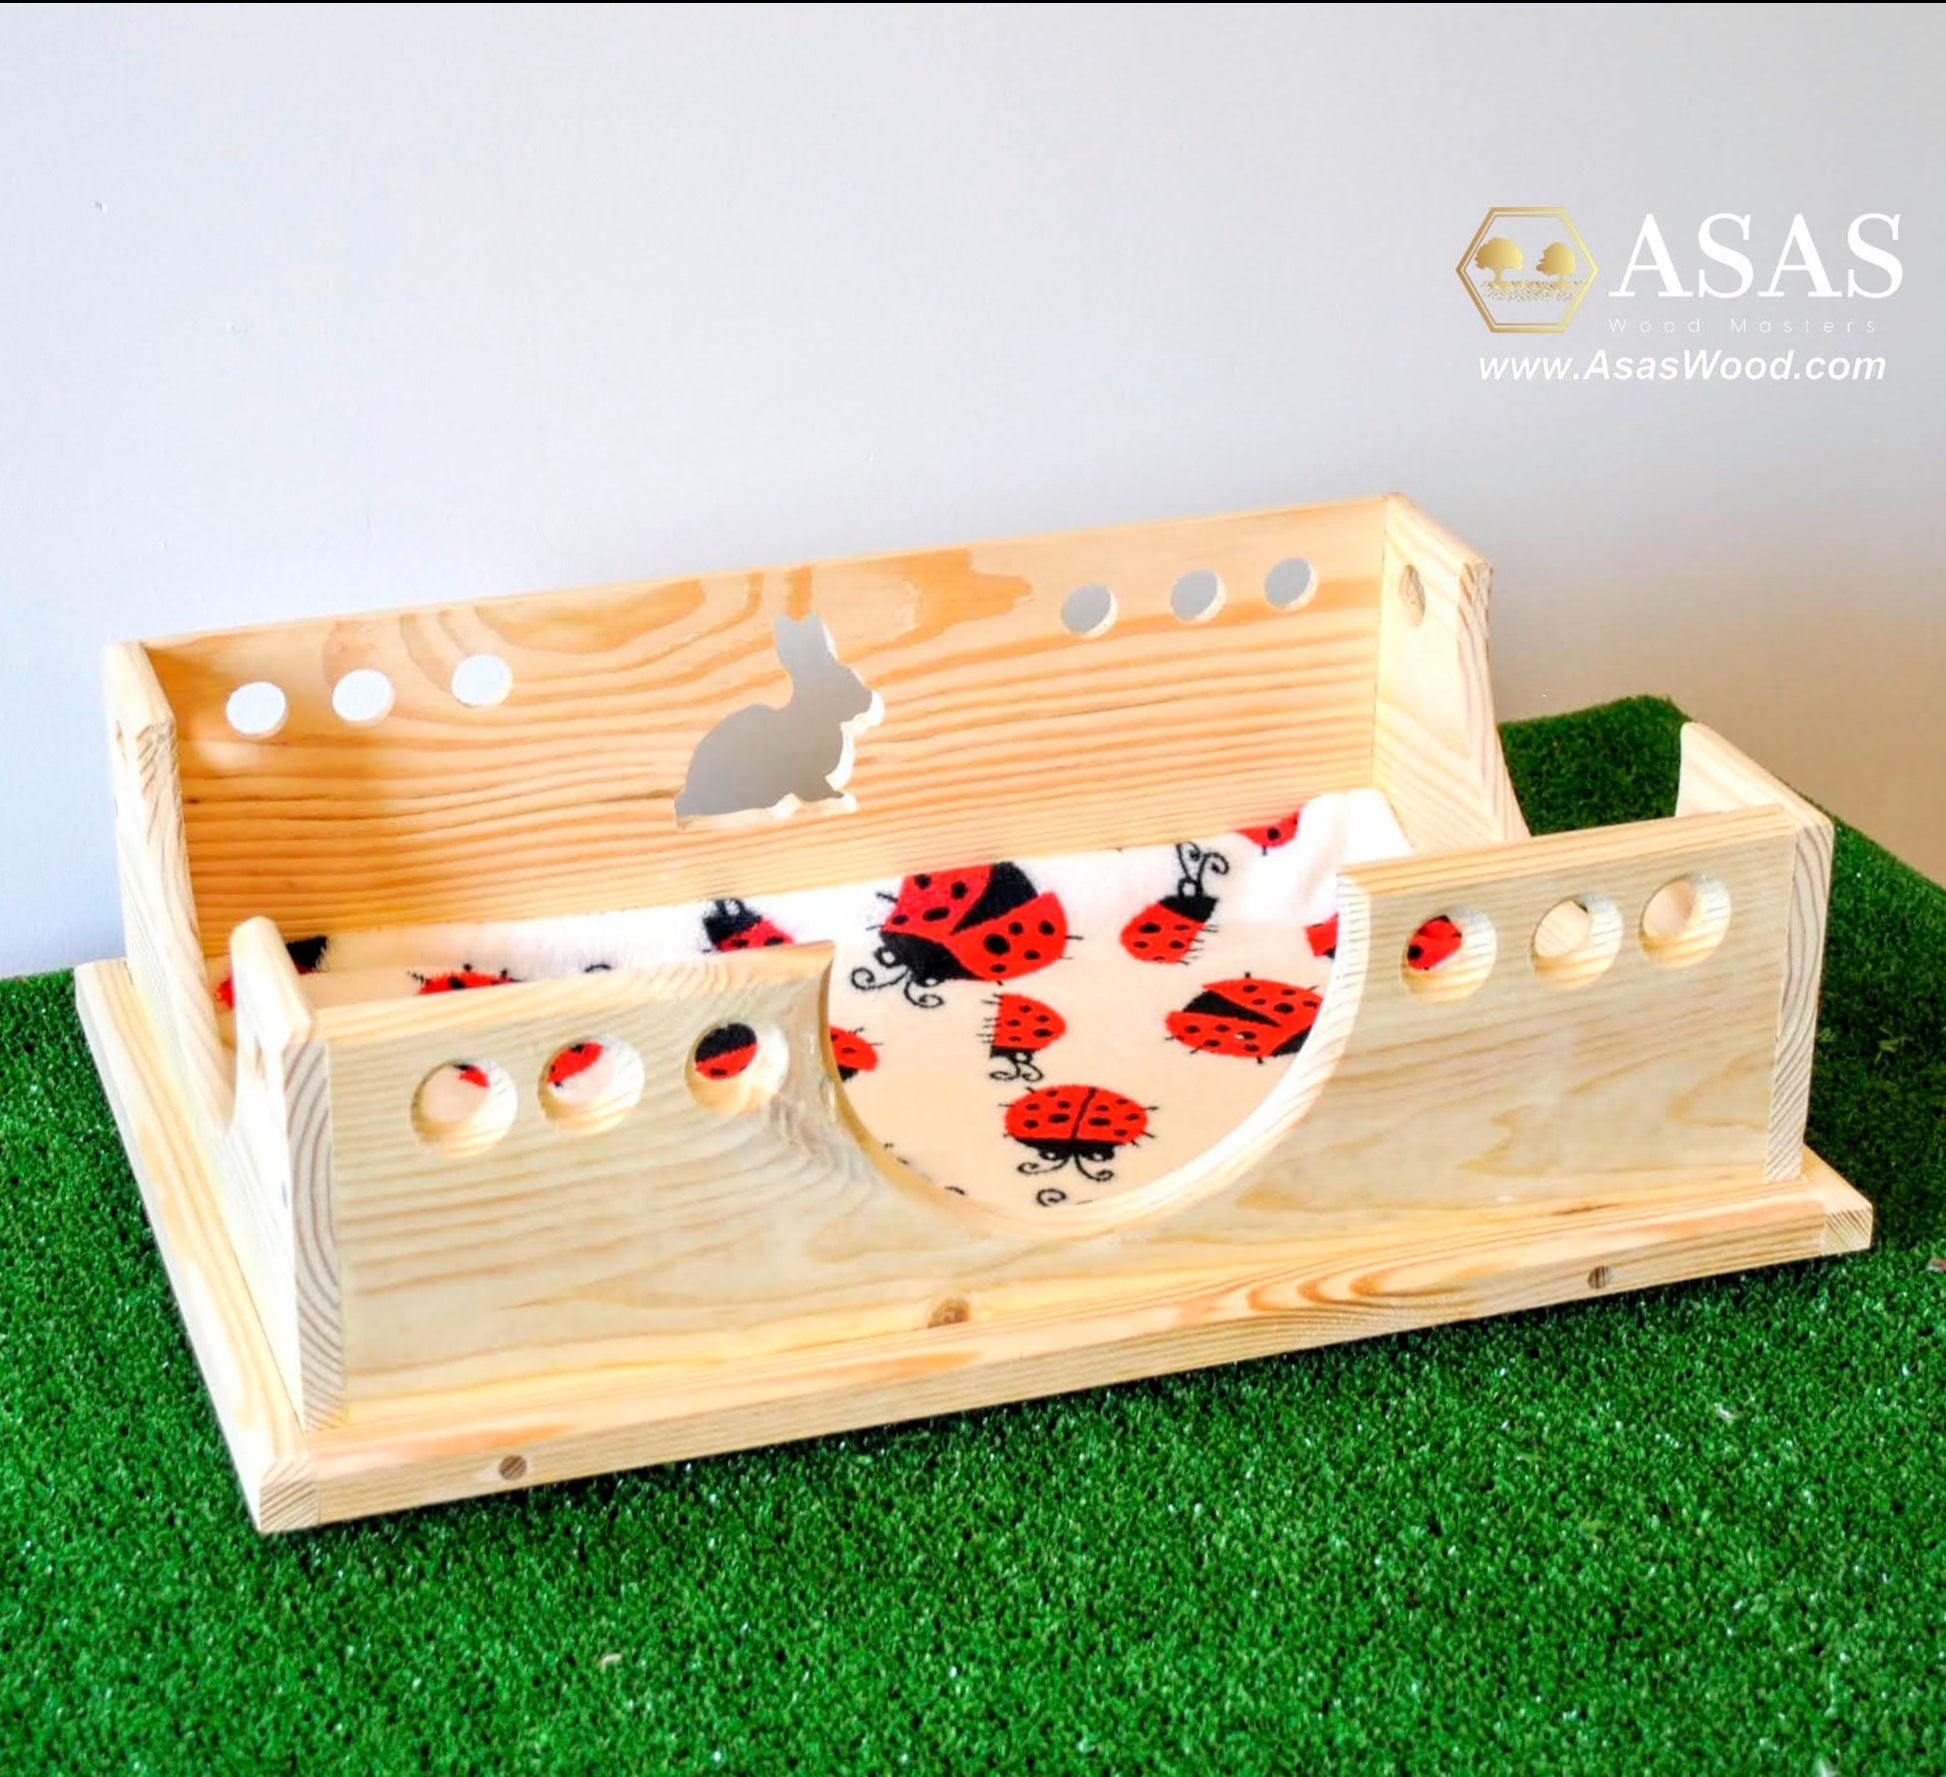 Wooden rabbit bed, made by AsasWood